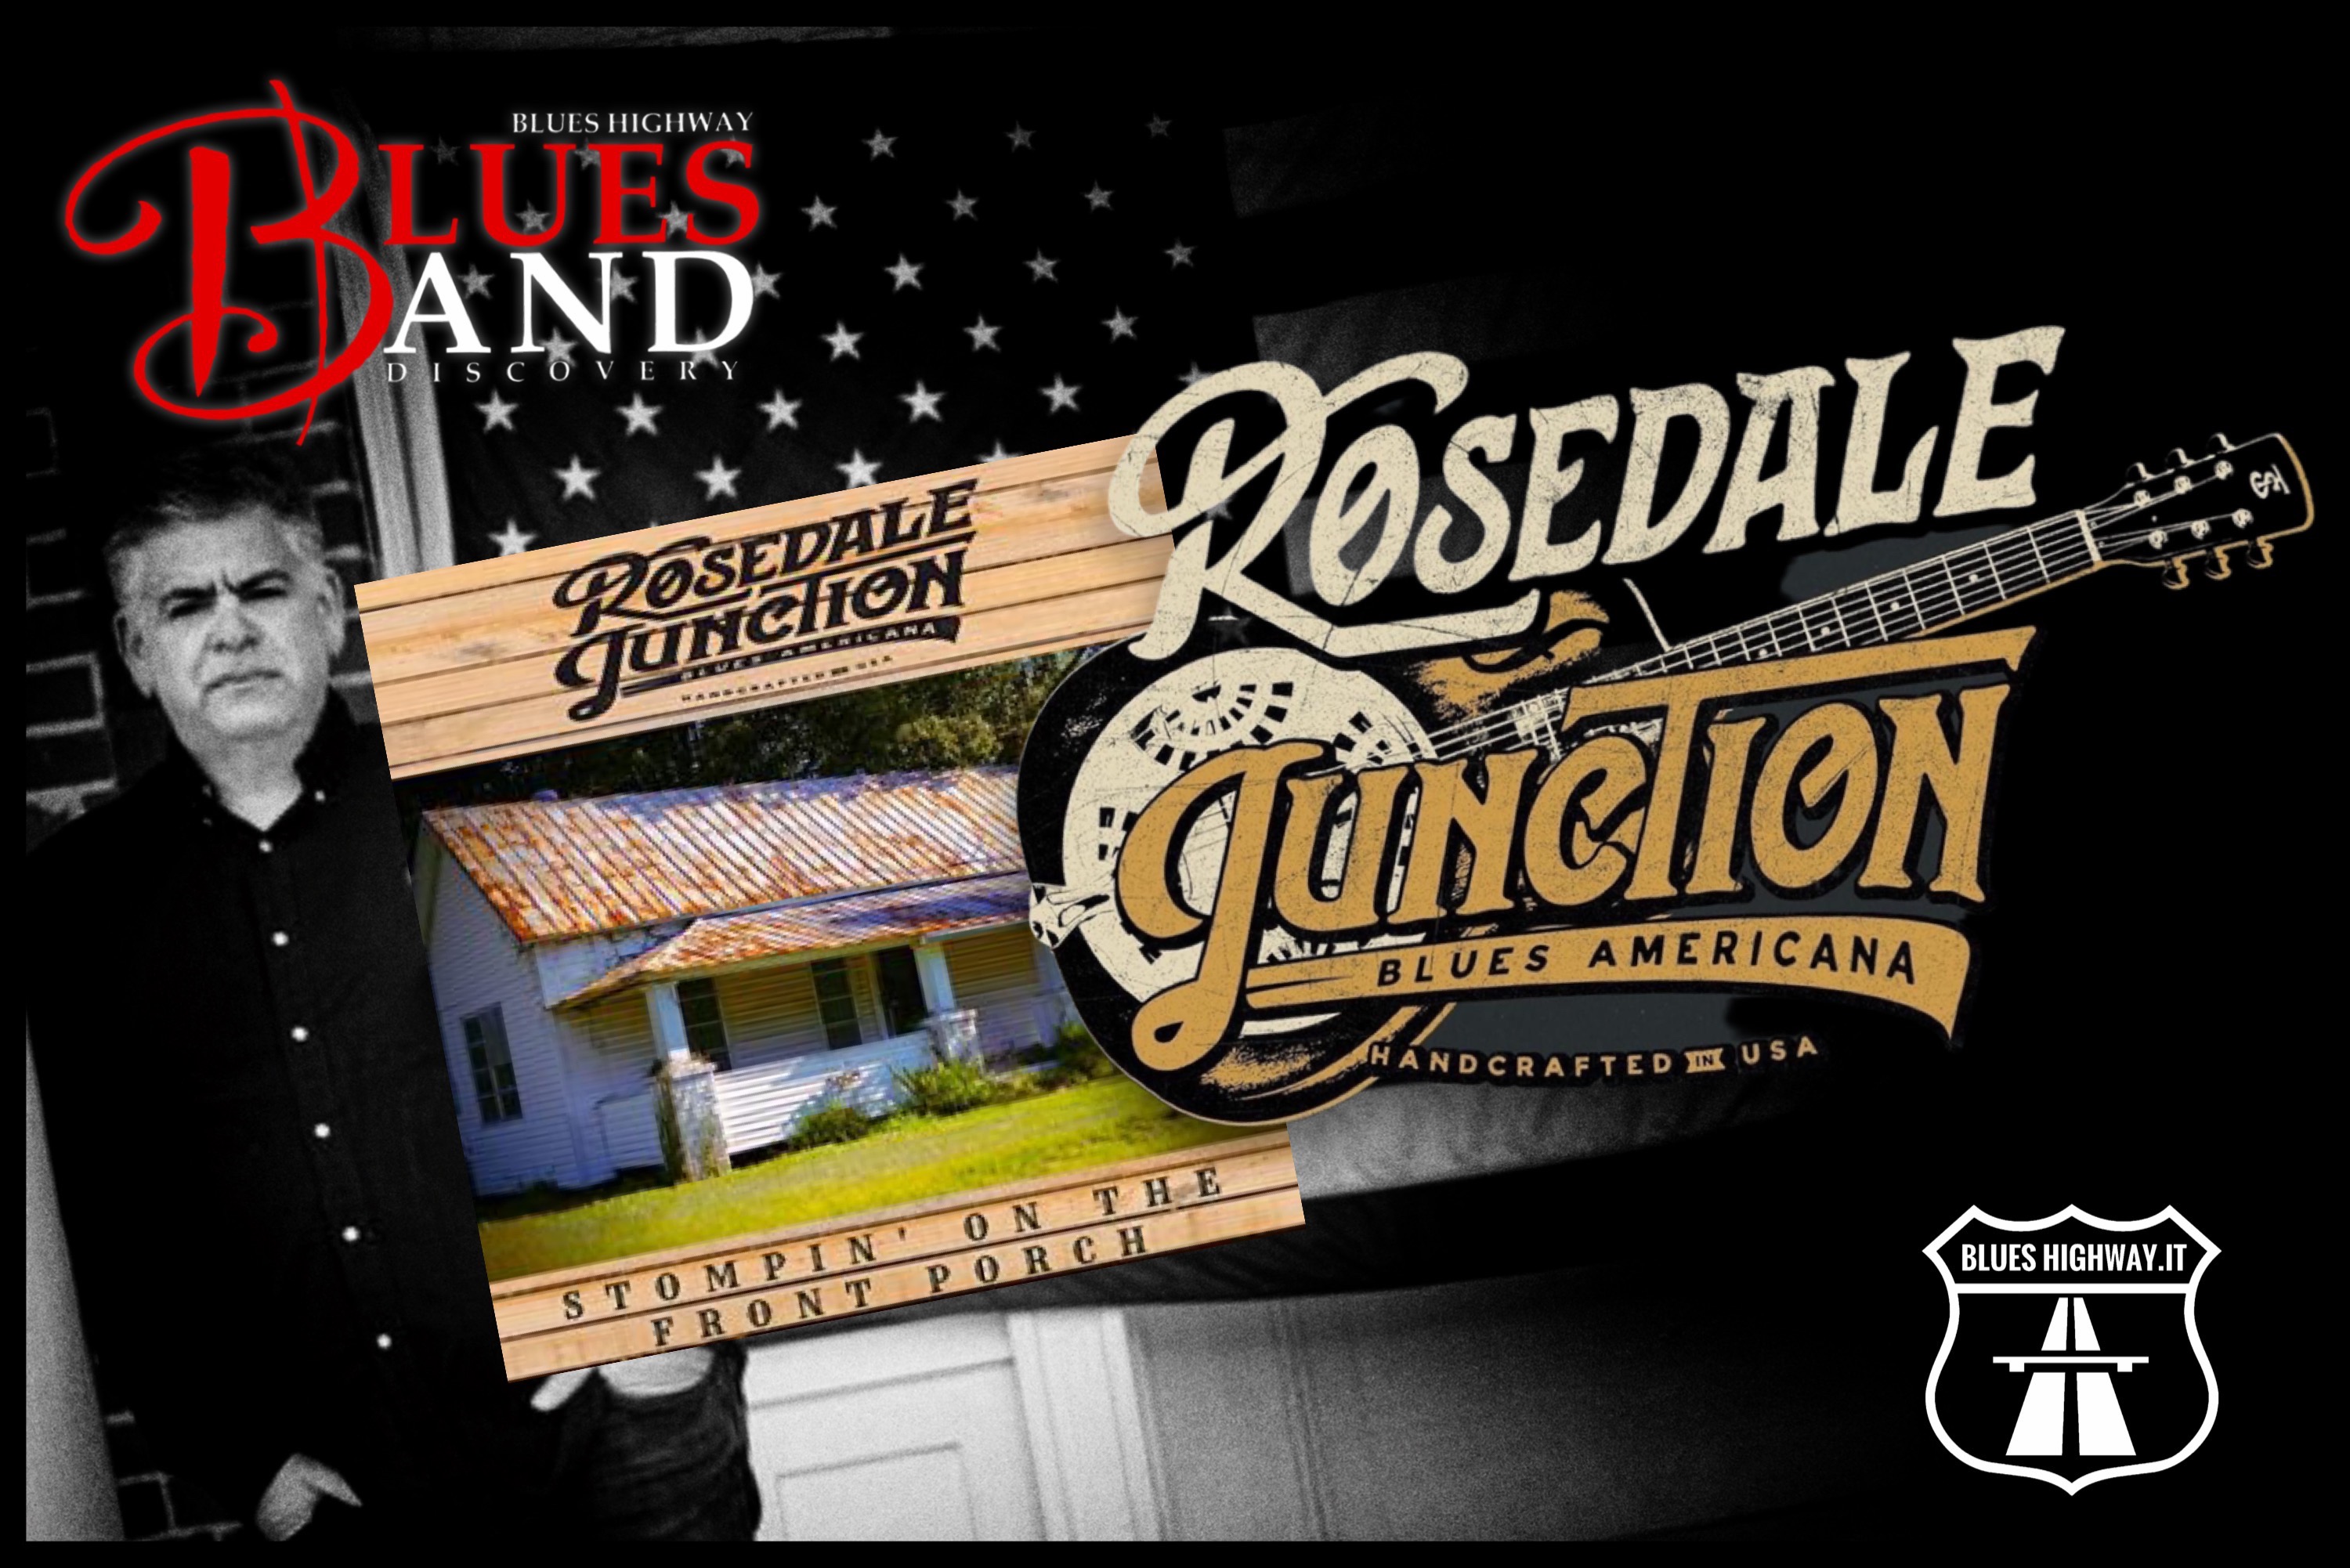 STOMPIN’ ON THE FRONT PORCH – ROSEDALE JUNCTION AMERICAN BLUES